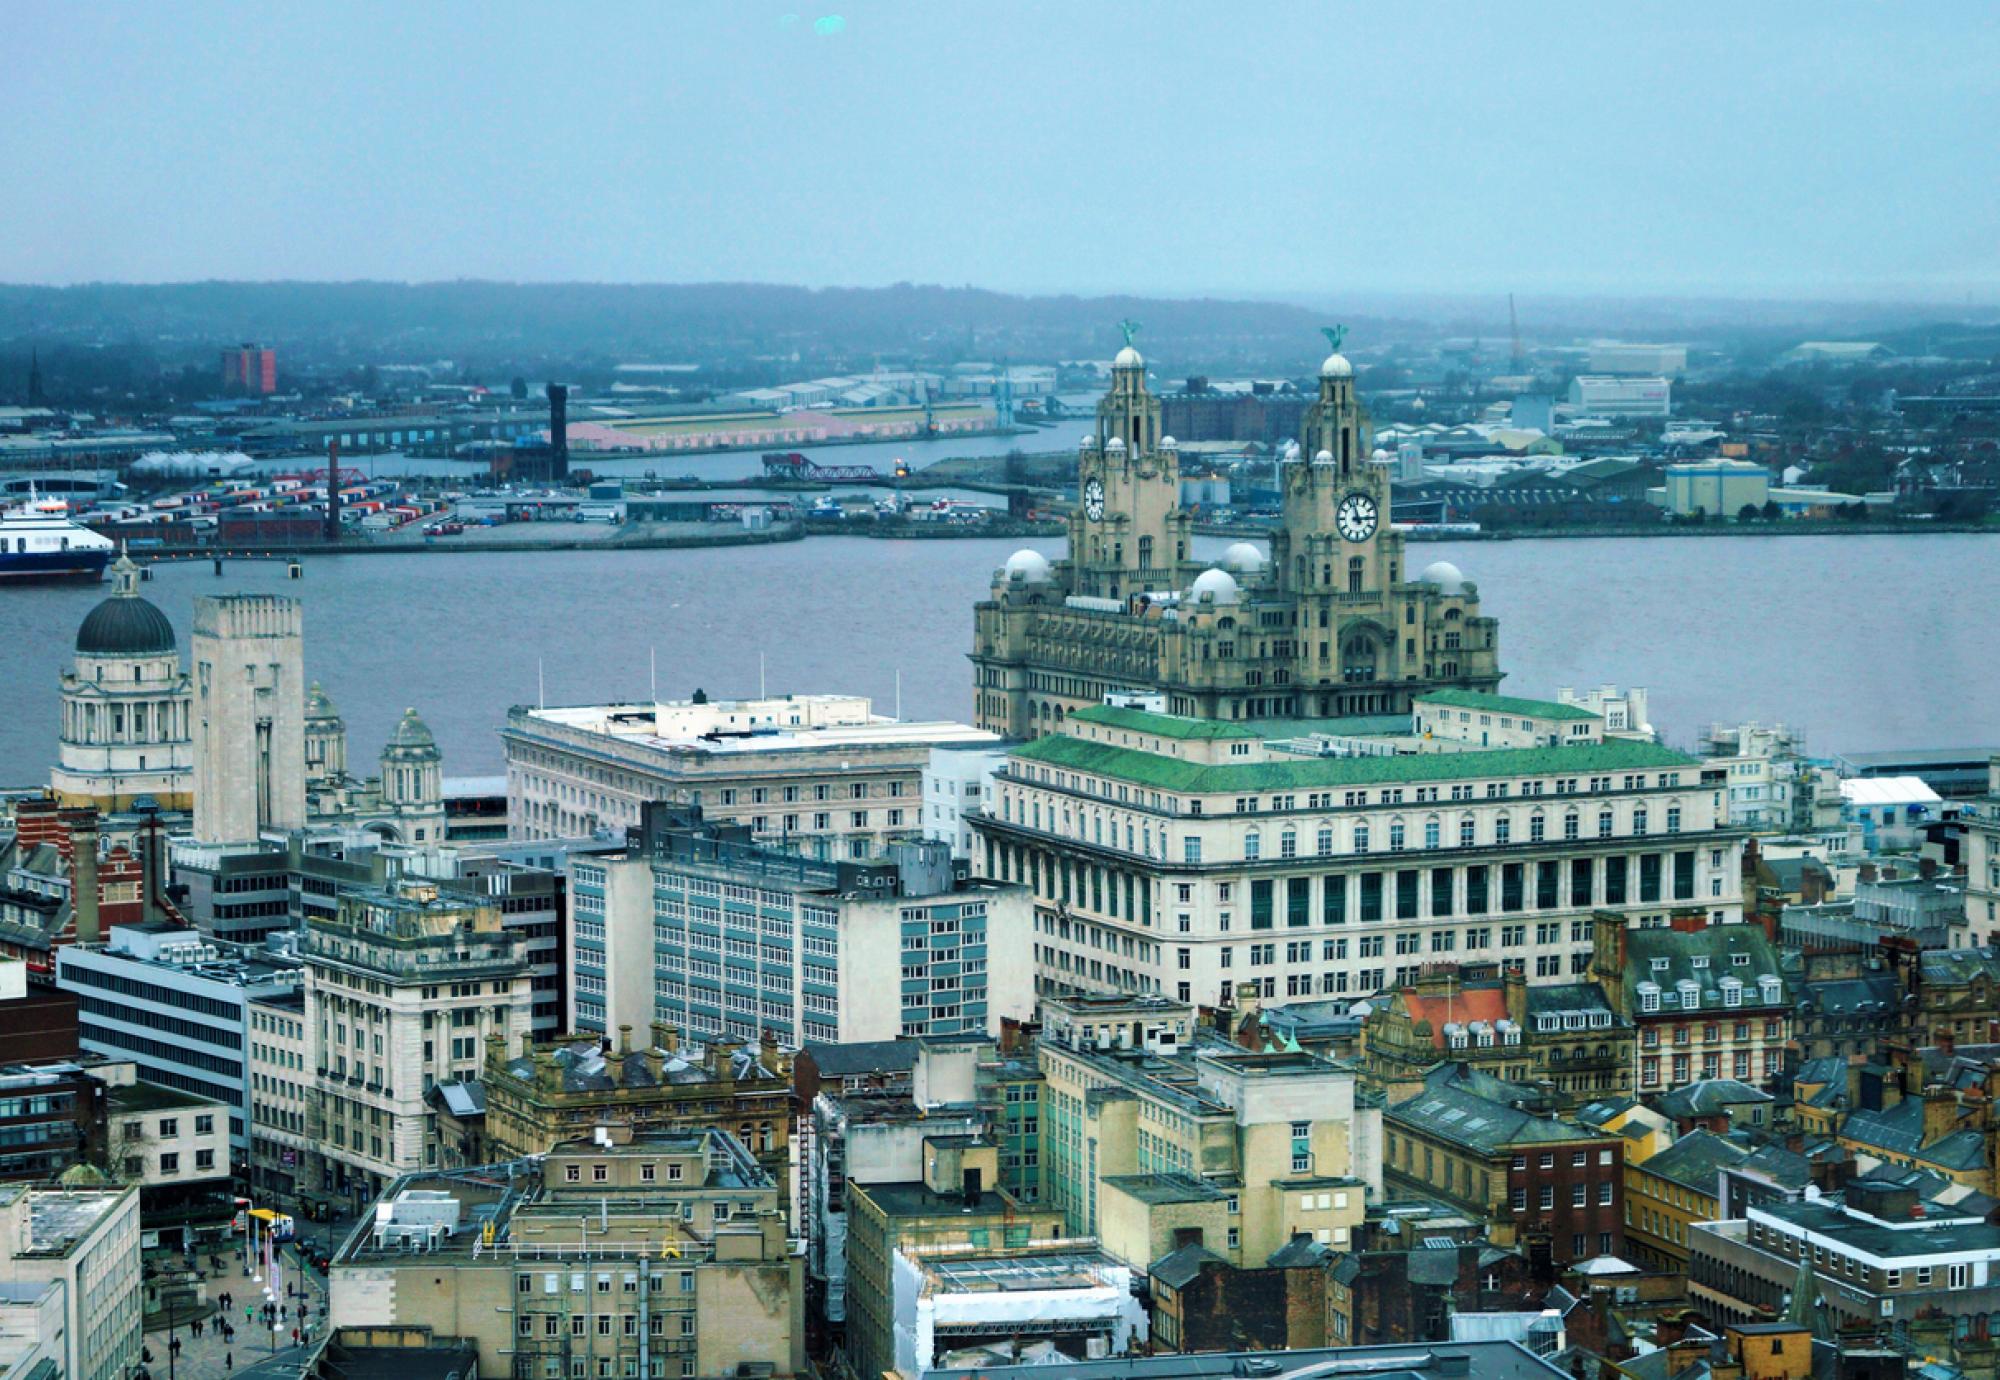 view of Liverpool and the Royal Liver Building on the river Mersey England.